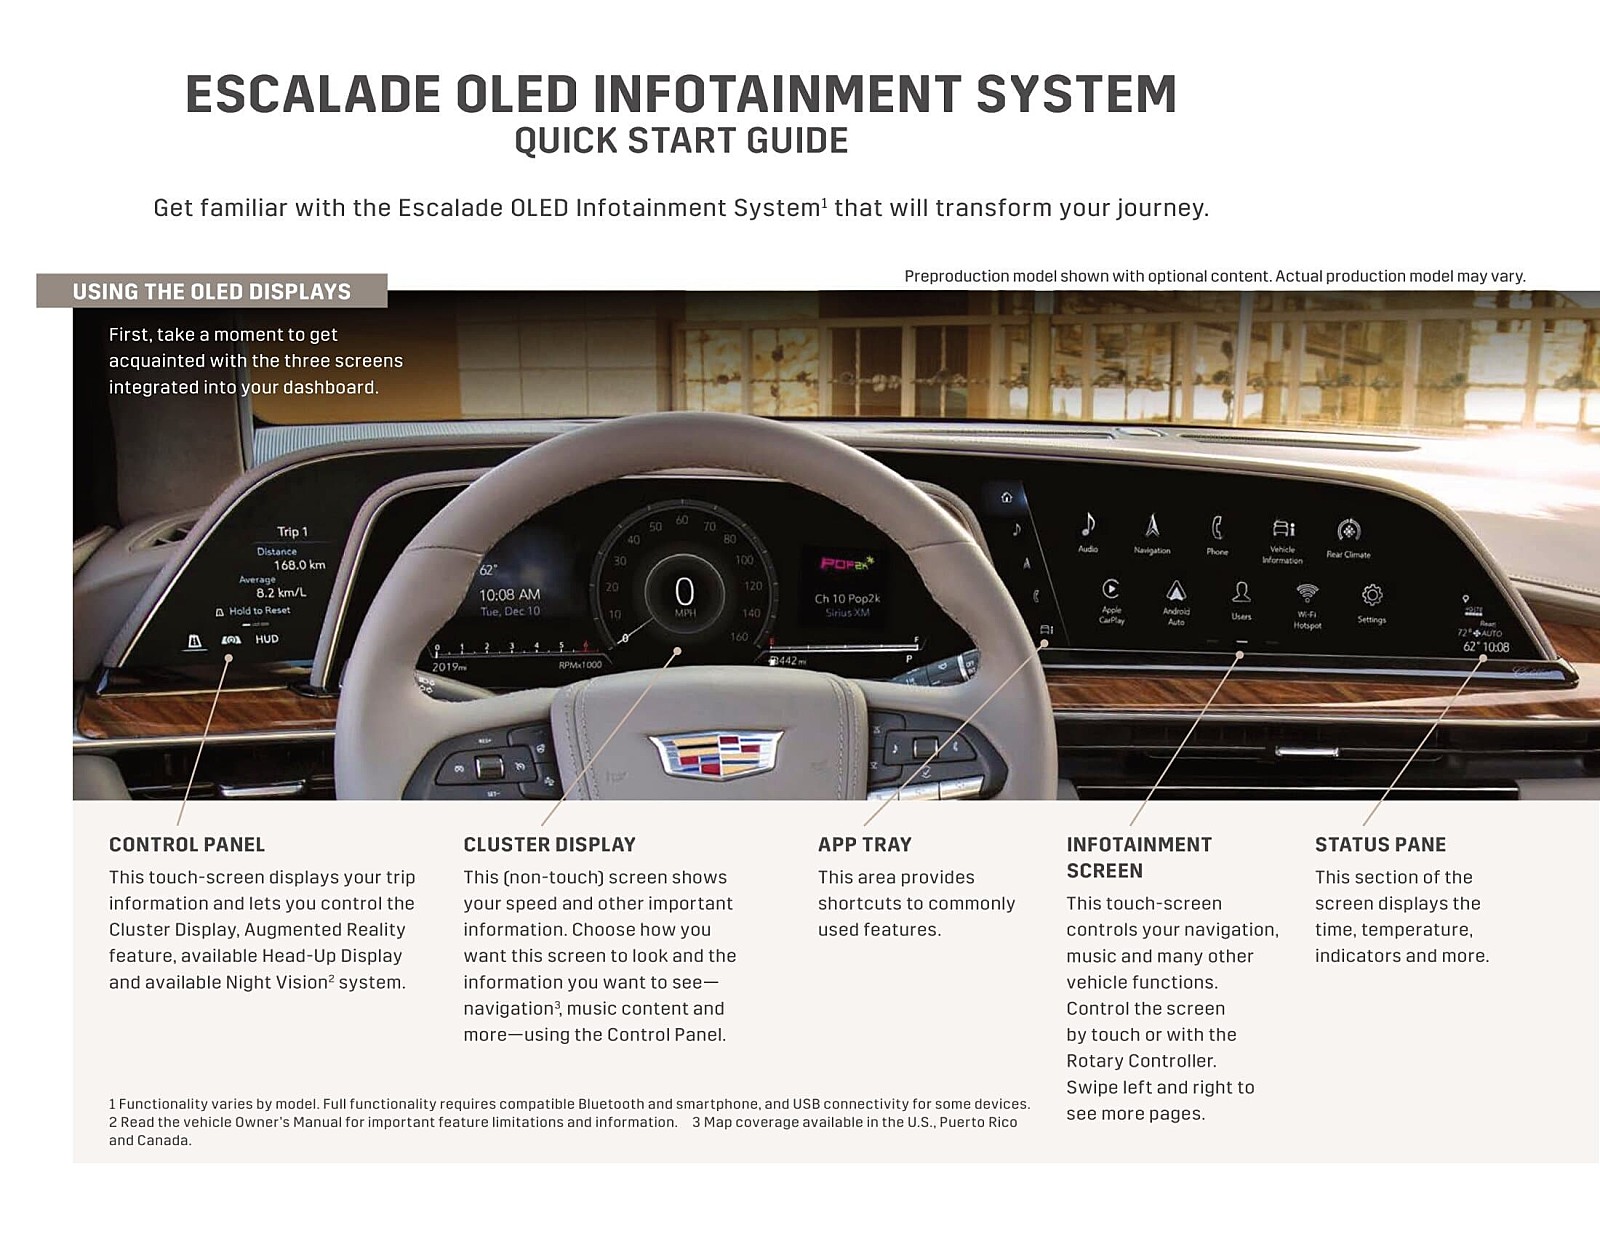 2021-cadillac-escalade-oled-infotainment-system-quick-start-guide-v2_0001.jpg?type=w1600